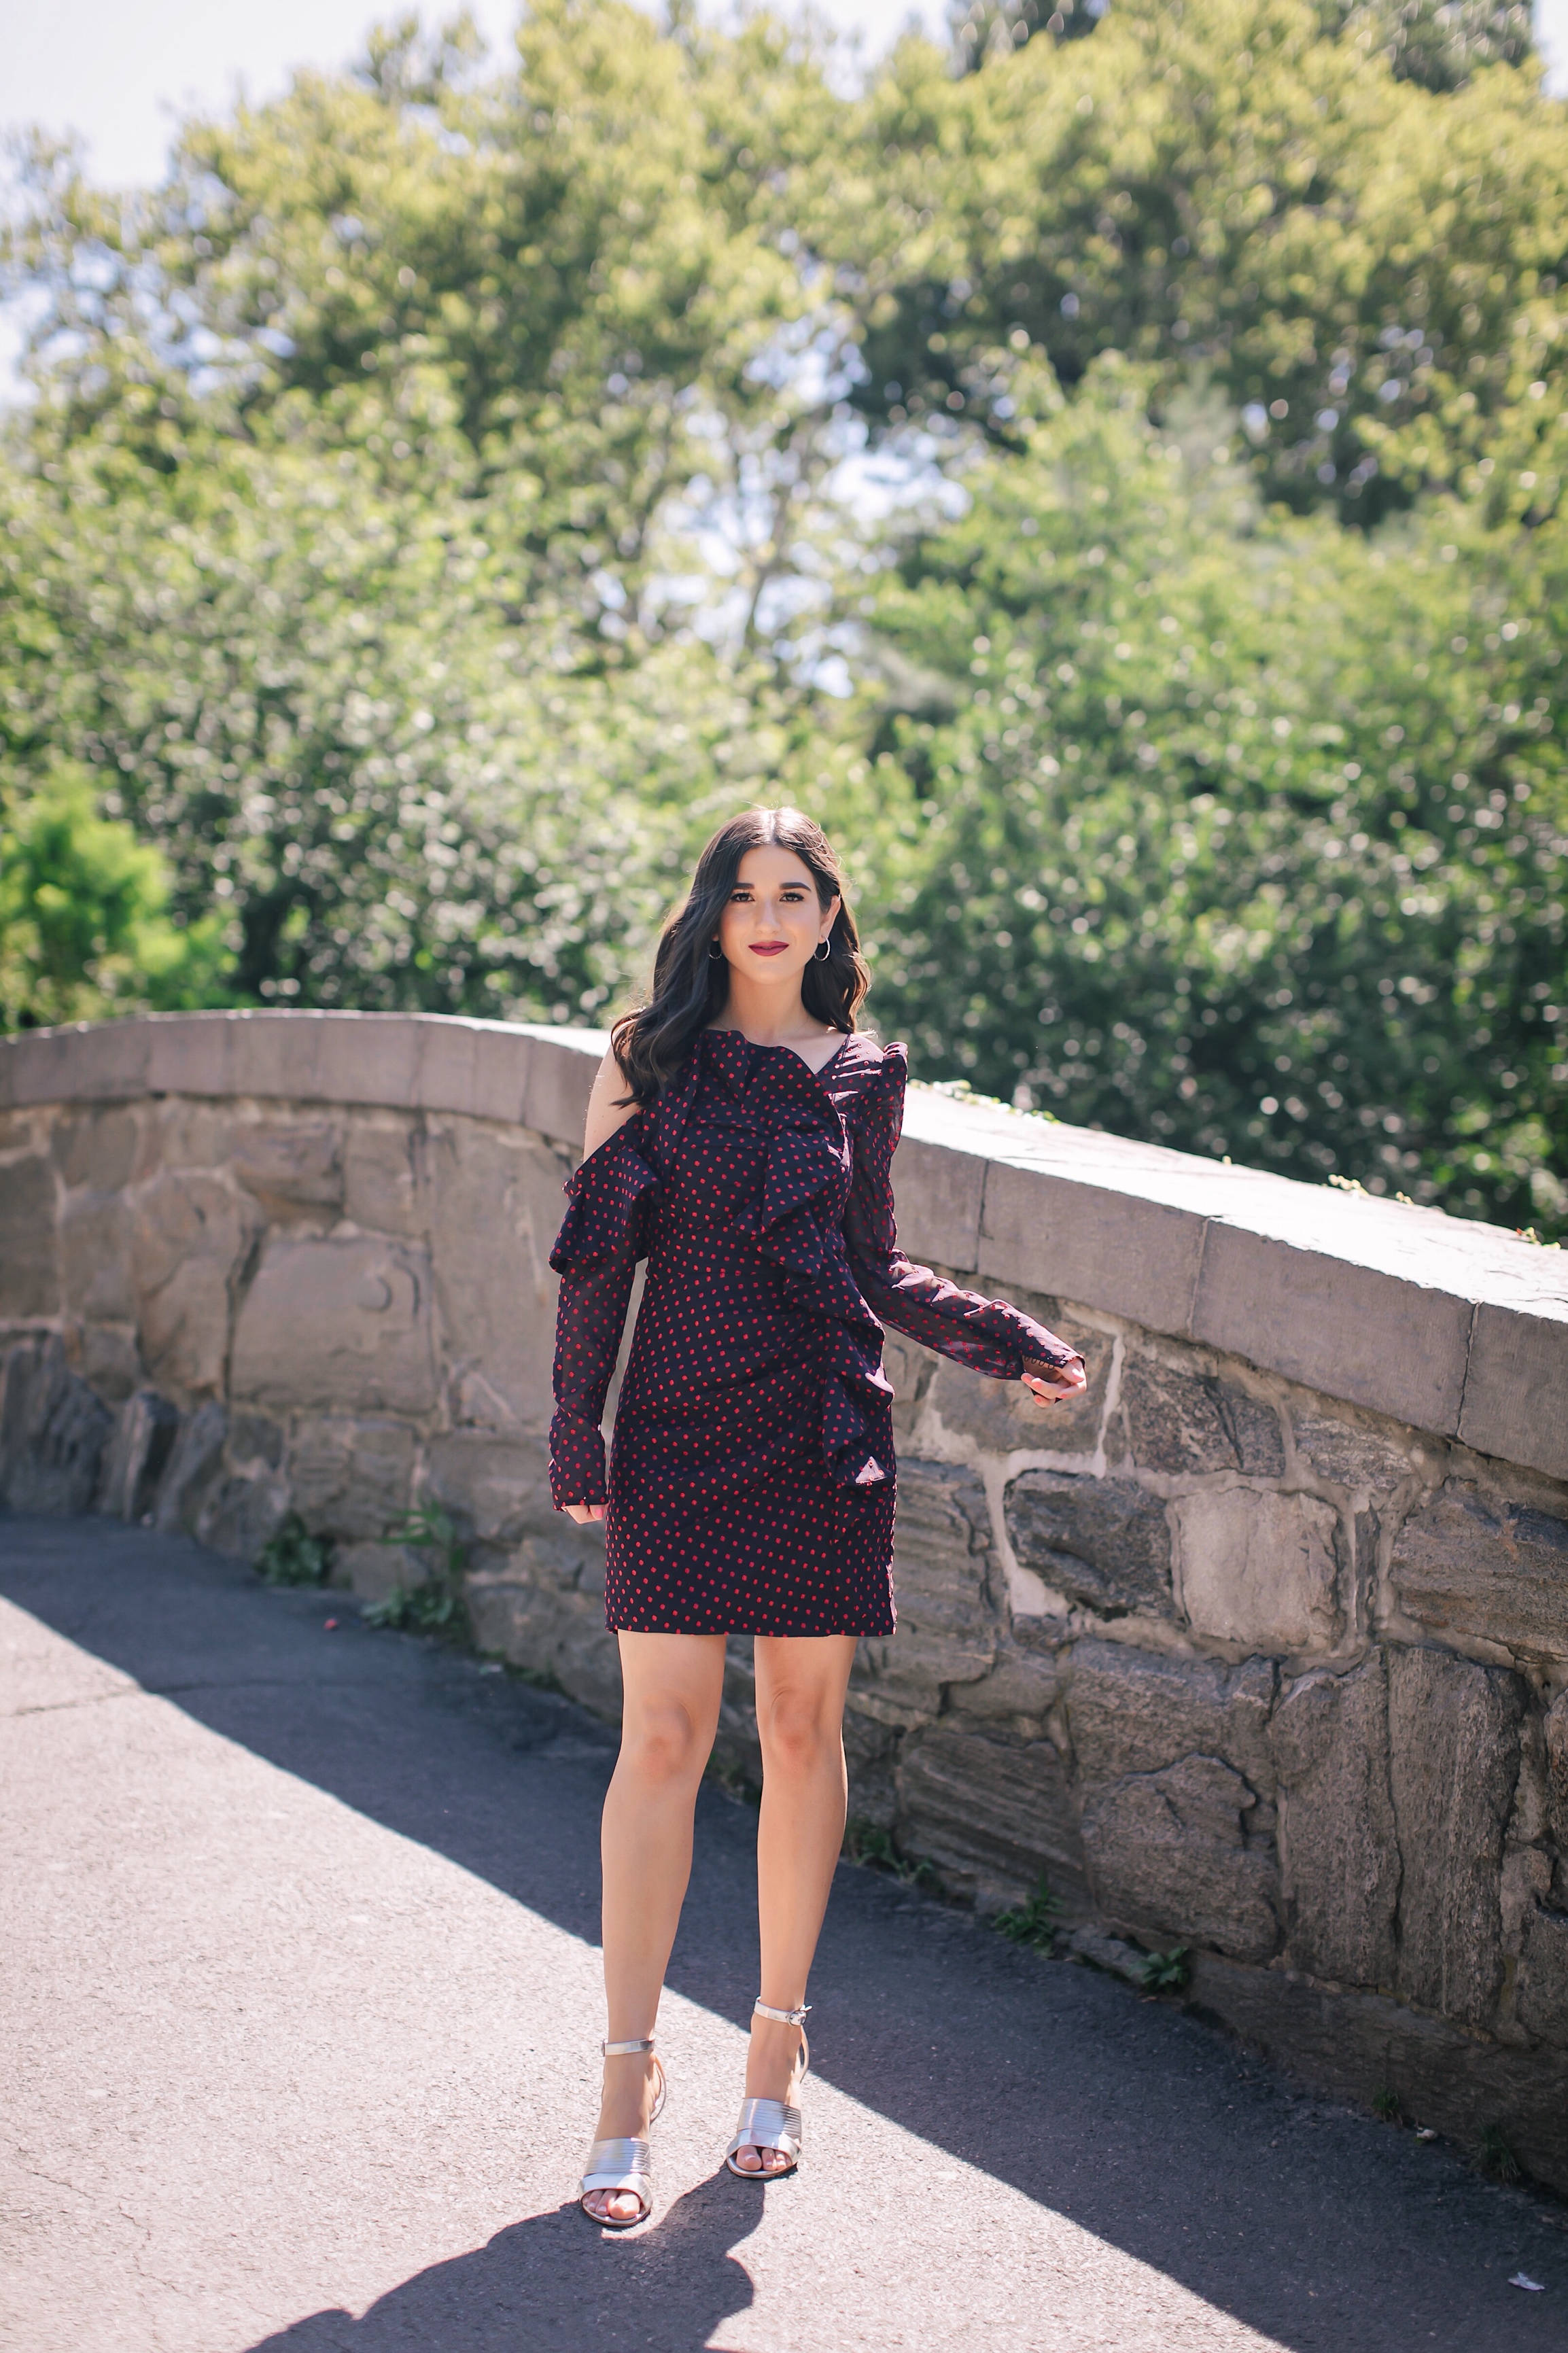 Aging Out Cold Shoulder Polka Dot Dress Silver Heels Esther Santer Fashion Blog NYC Street Style Blogger Outfit OOTD Trendy Shopping Girl What How To Wear Industry Diamond Jewelry Self Portait Central Park Photoshoot Gapstow Bridge Red Lip Summer Love.JPG